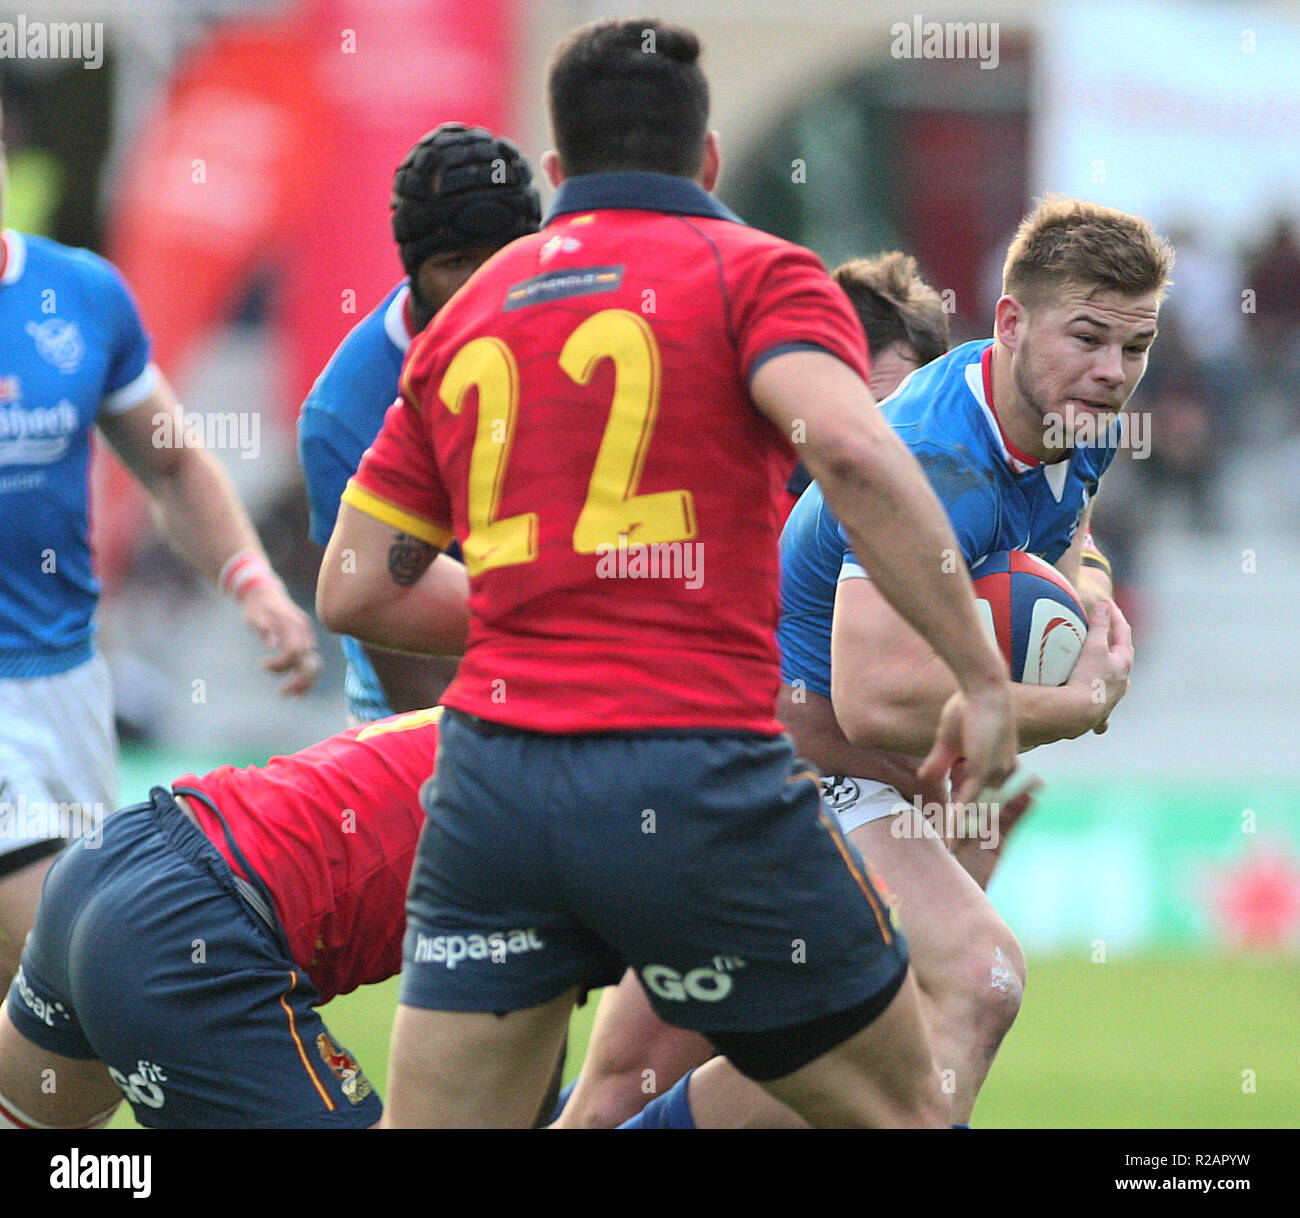 Madrid, Spain. 17th Nov 2018.  Rugby Test Match  Du Toit Janry of Namibia,in game action during  the match between Spain-Namibia to Universidad Complutence Stadium,to Madrid Spain. Credit: Leo Cavallo/Alamy Live News Stock Photo